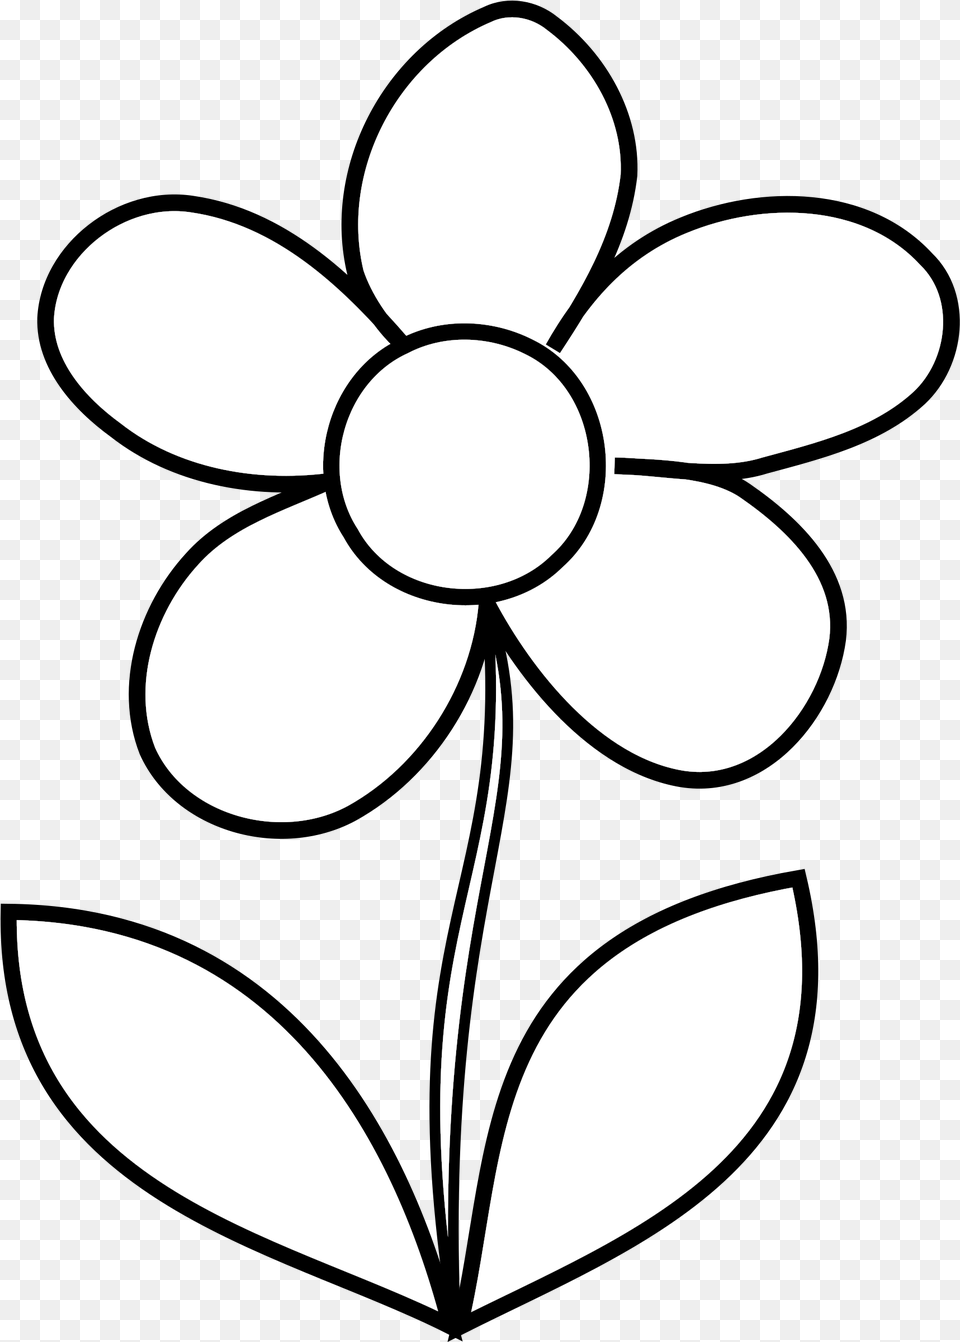 Simple Flower Bw By Coloring Pictures Of Flowers, Stencil, Plant, Daisy, Astronomy Free Png Download